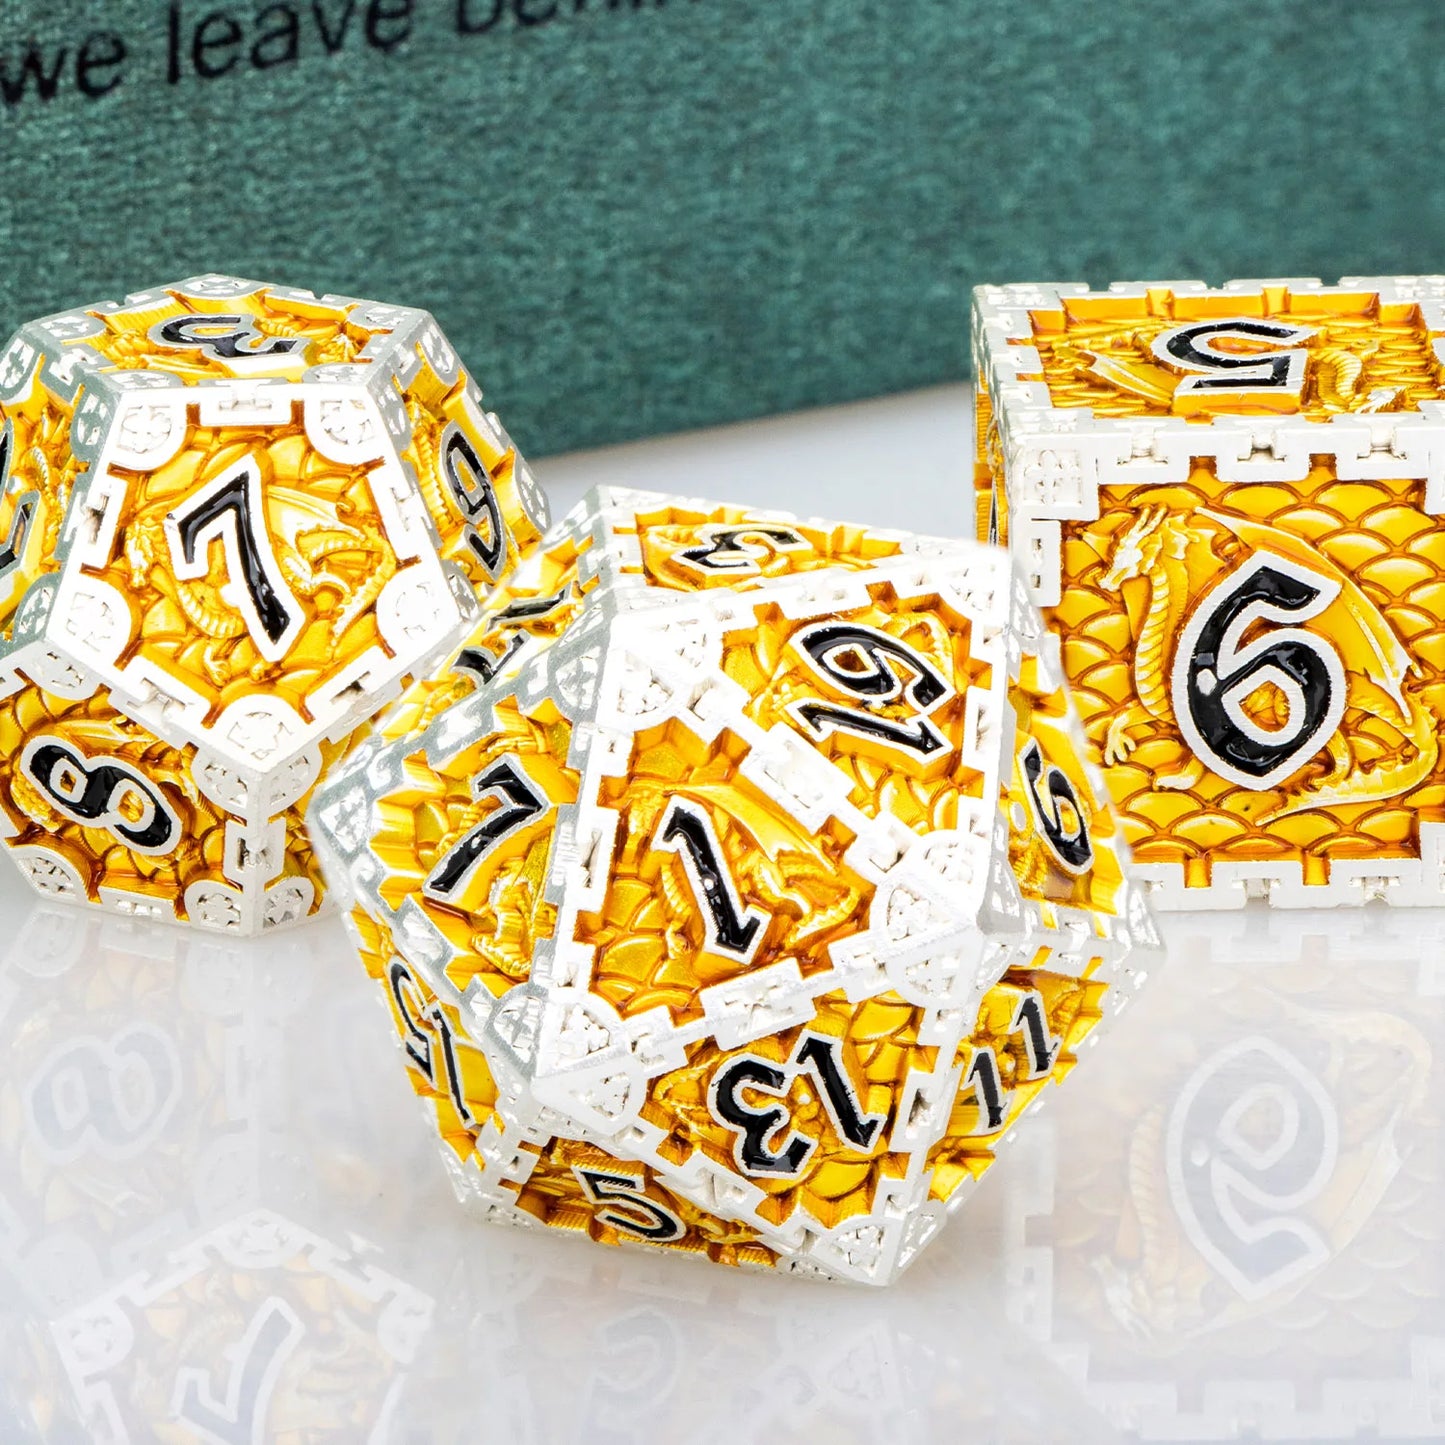 DND 20 Sided Metal RPG Polyhedral Gold Dragon D+D D20 Dice Set For Dungeon and Dragon Pathfinder Tabletop Role Playing Game